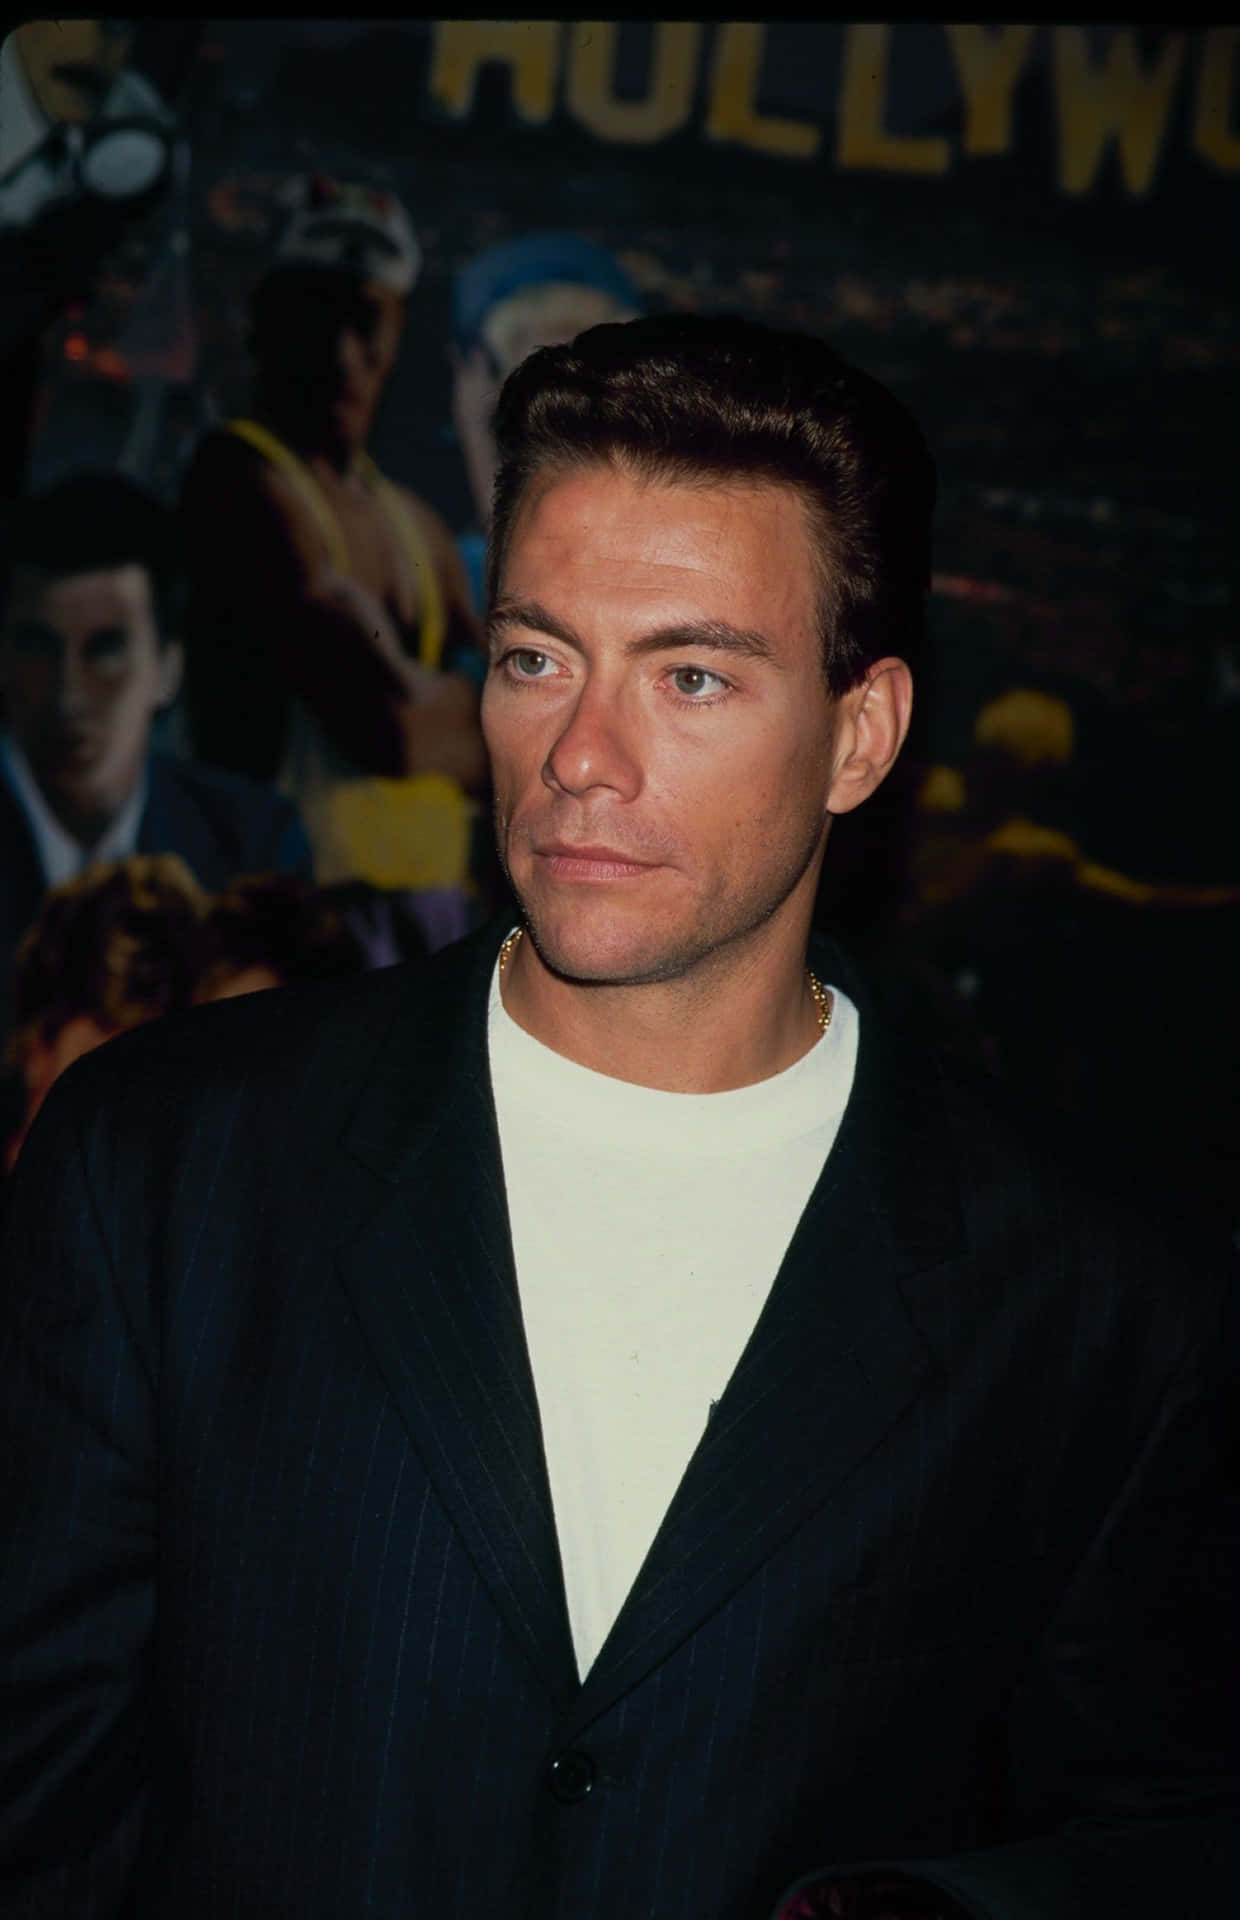 A Determined Jean Claude Van Damme In A Striking Pose.